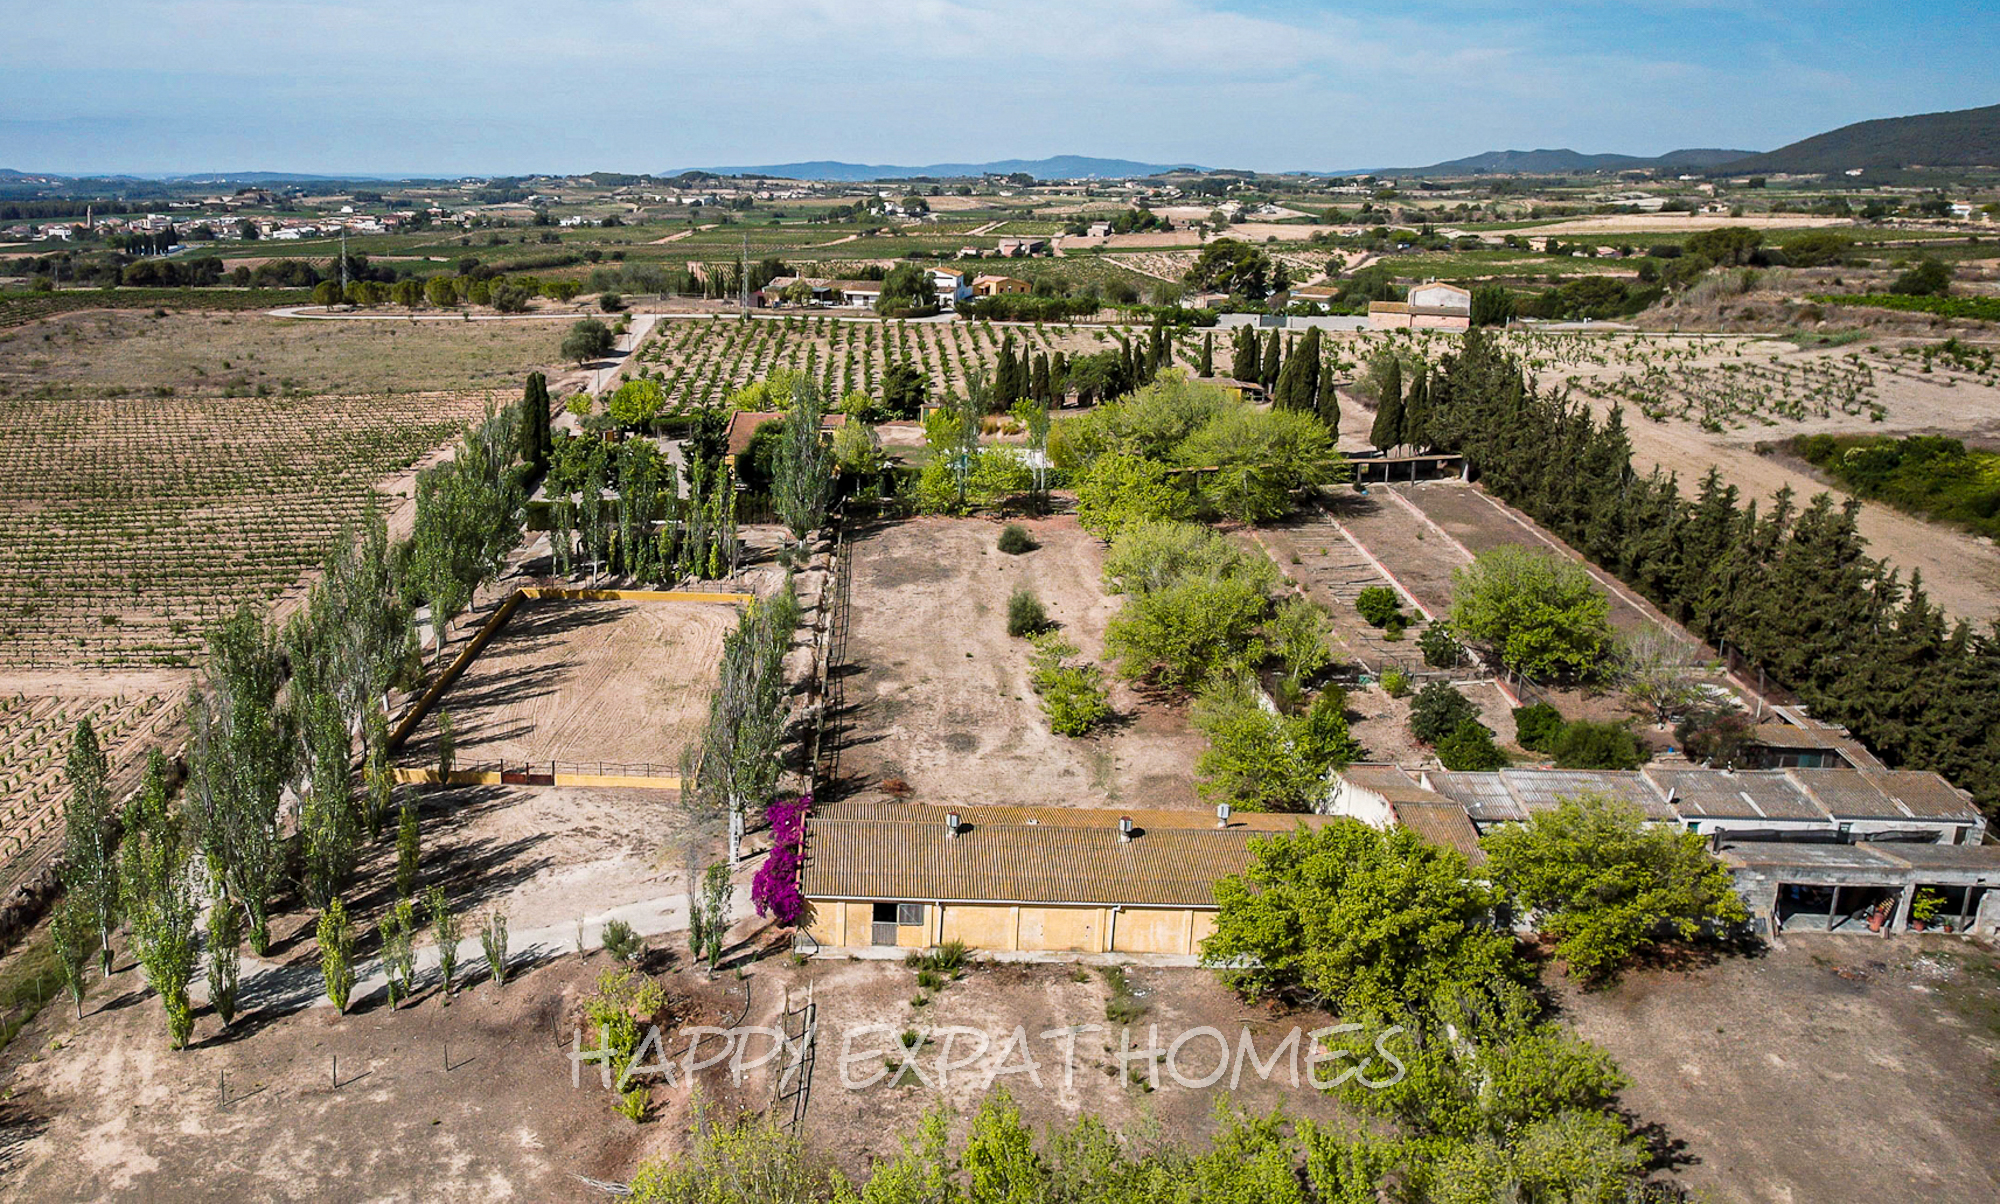 Exquisit country house surrounded by Catalan Vineyards